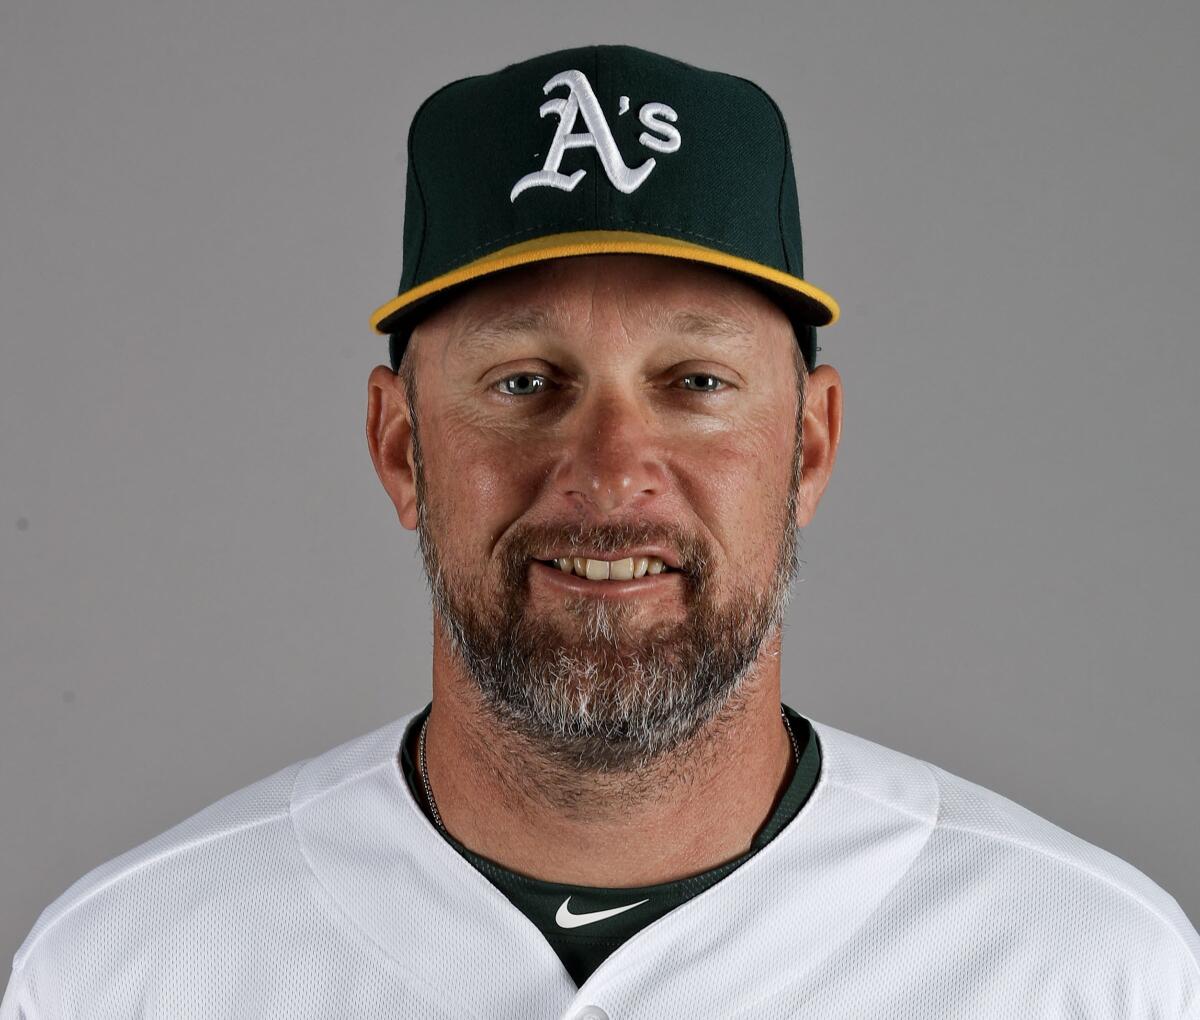 Former outfielder Mark Kotsay named new manager of Athletics - The